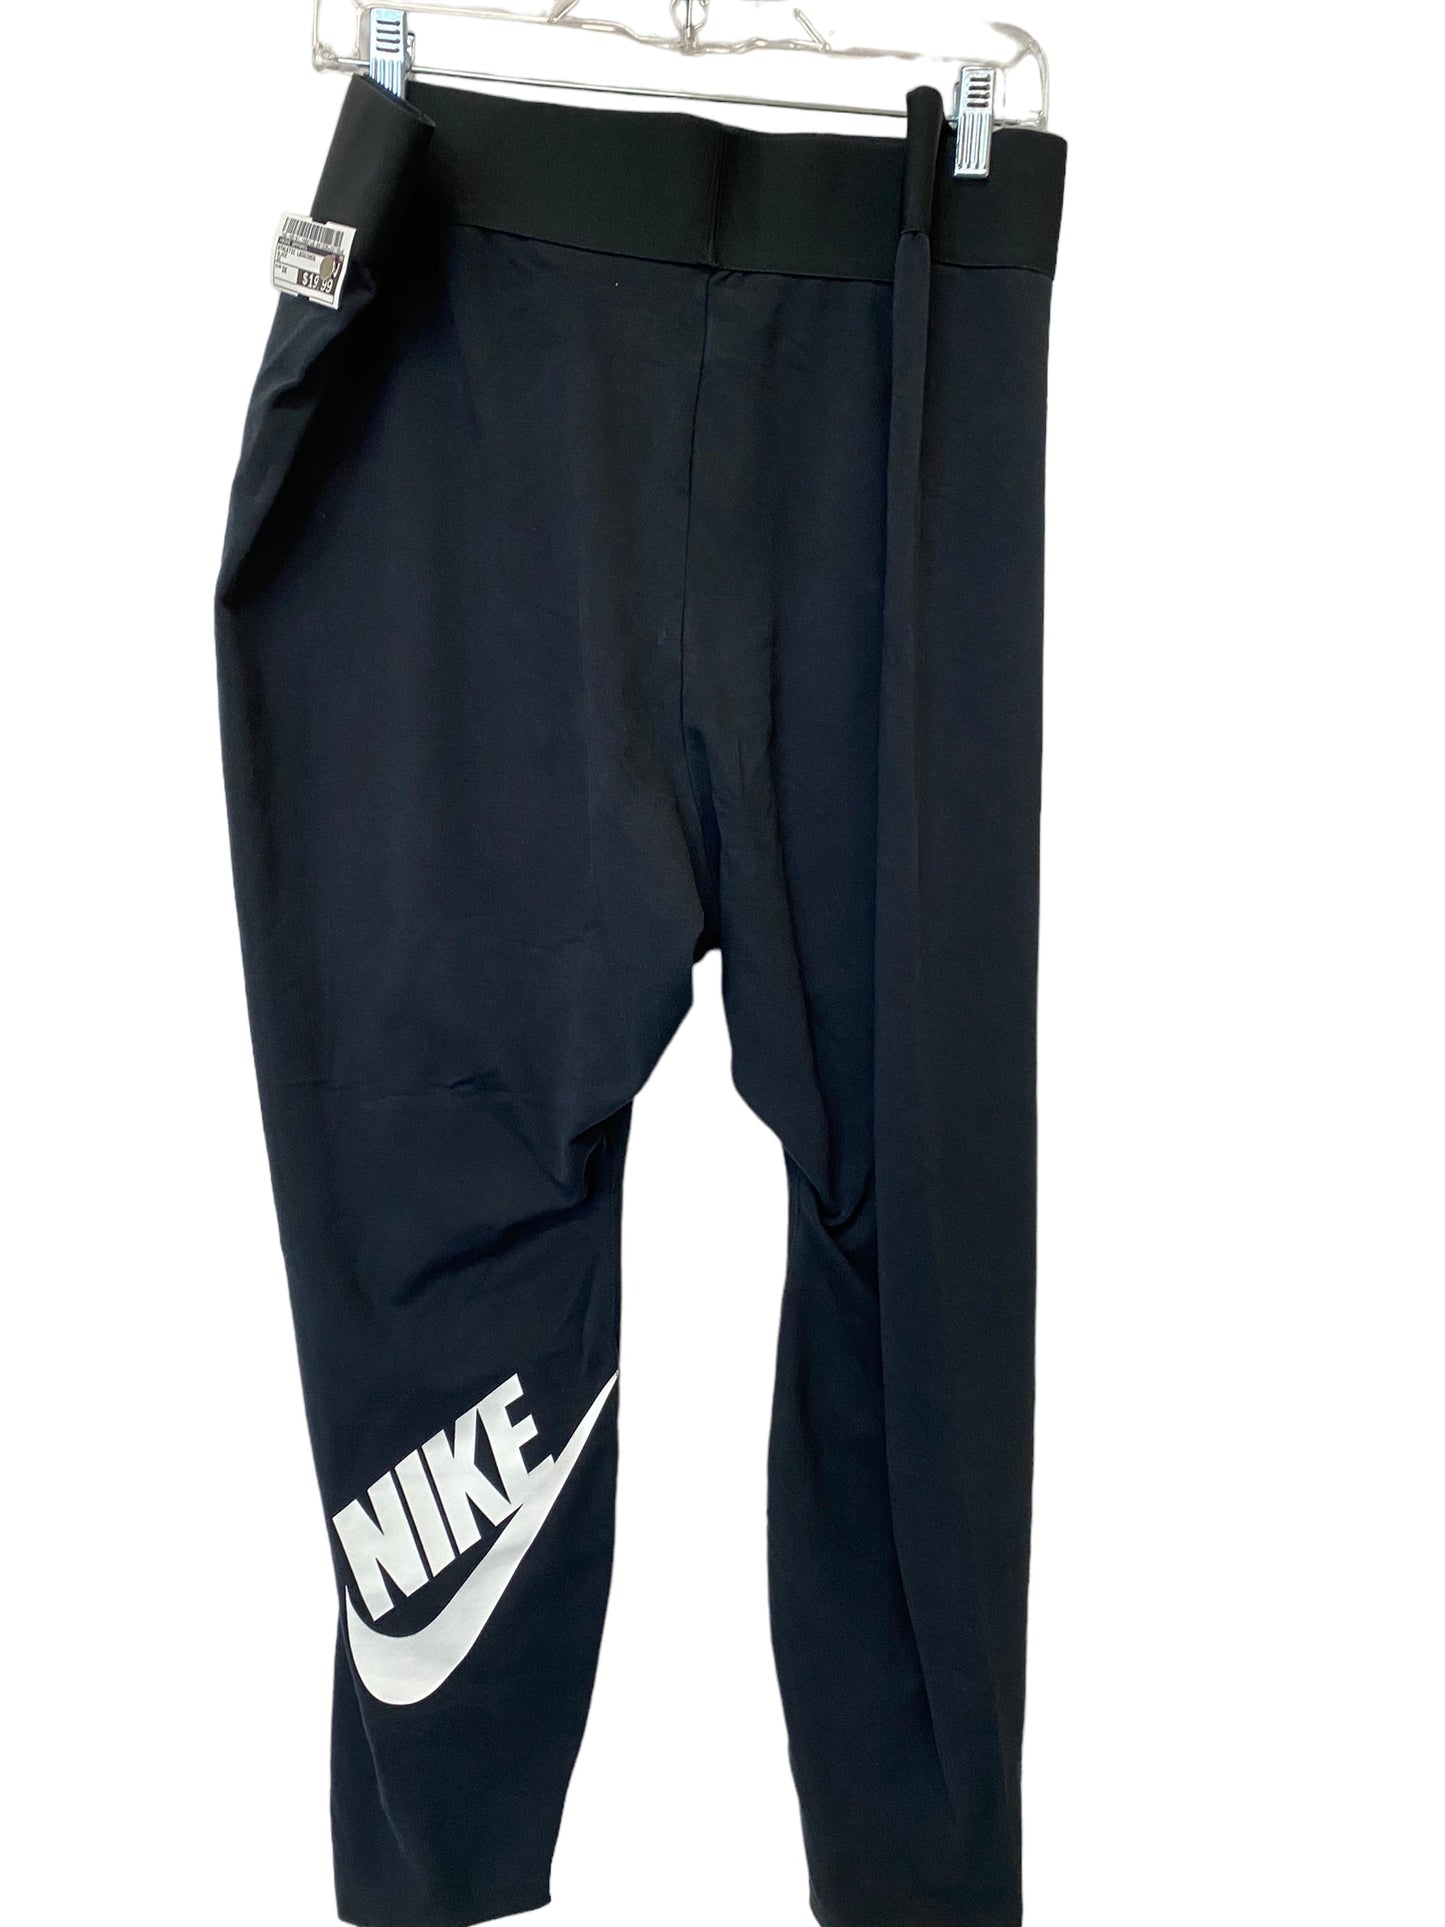 Athletic Leggings By Nike Apparel  Size: 3x